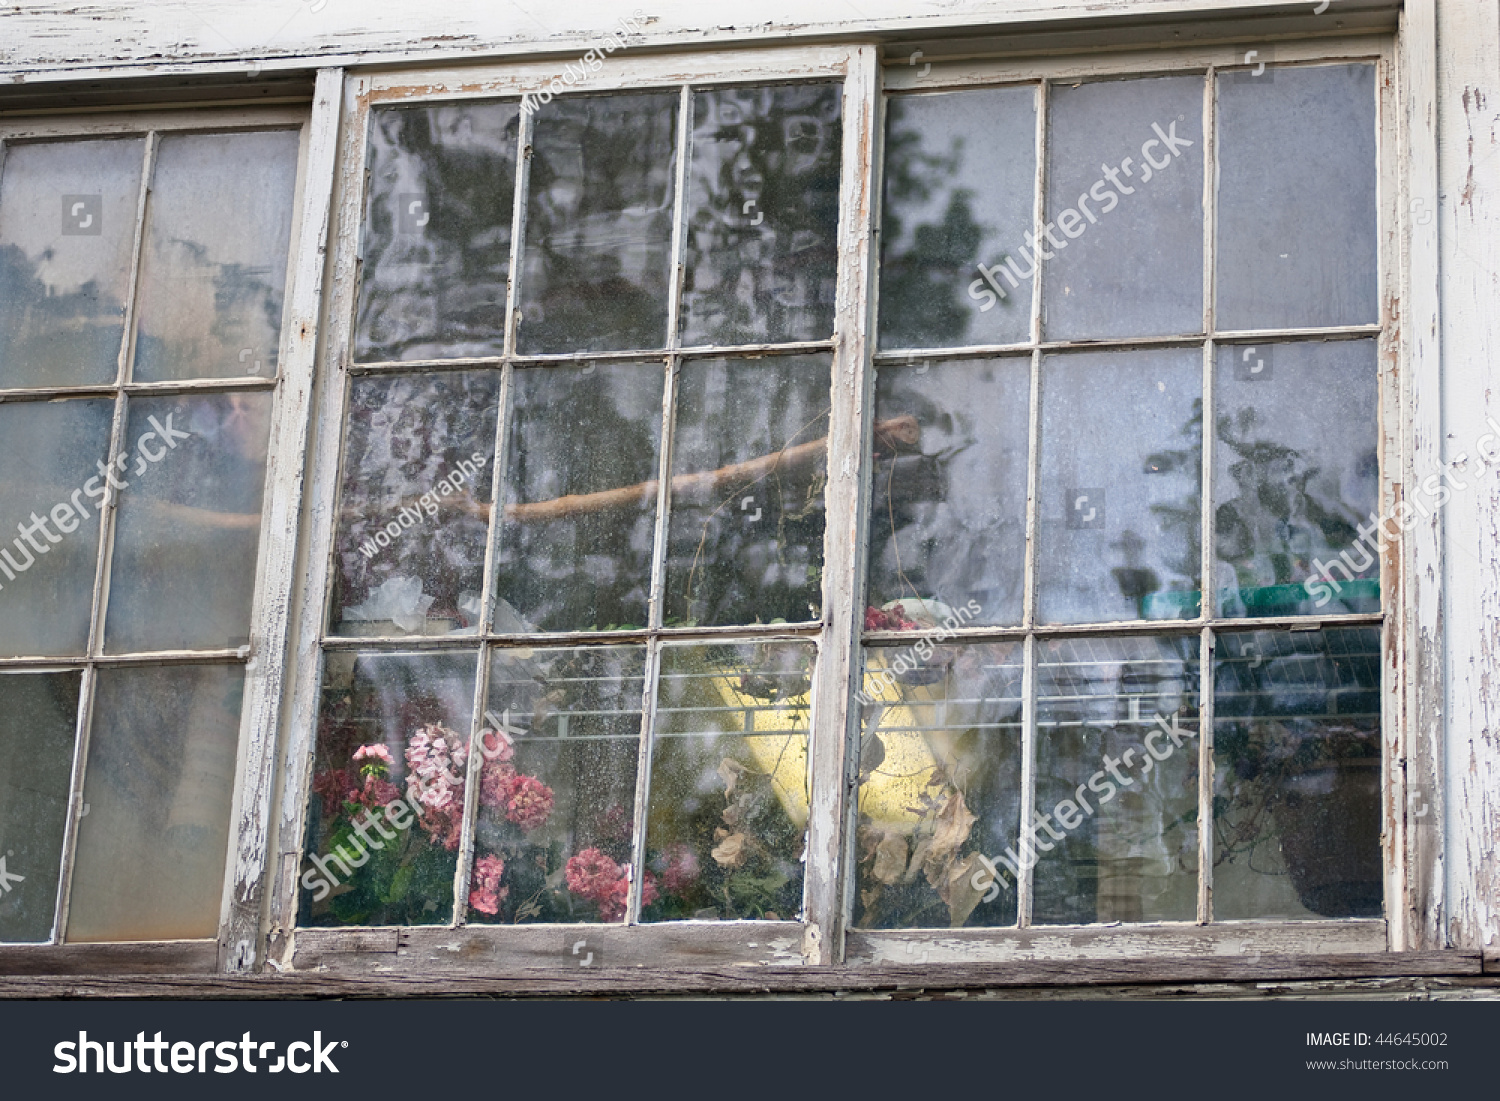 stock-photo-looking-in-through-a-large-dirty-window-with-reflections-in-the-glass-44645002.jpg